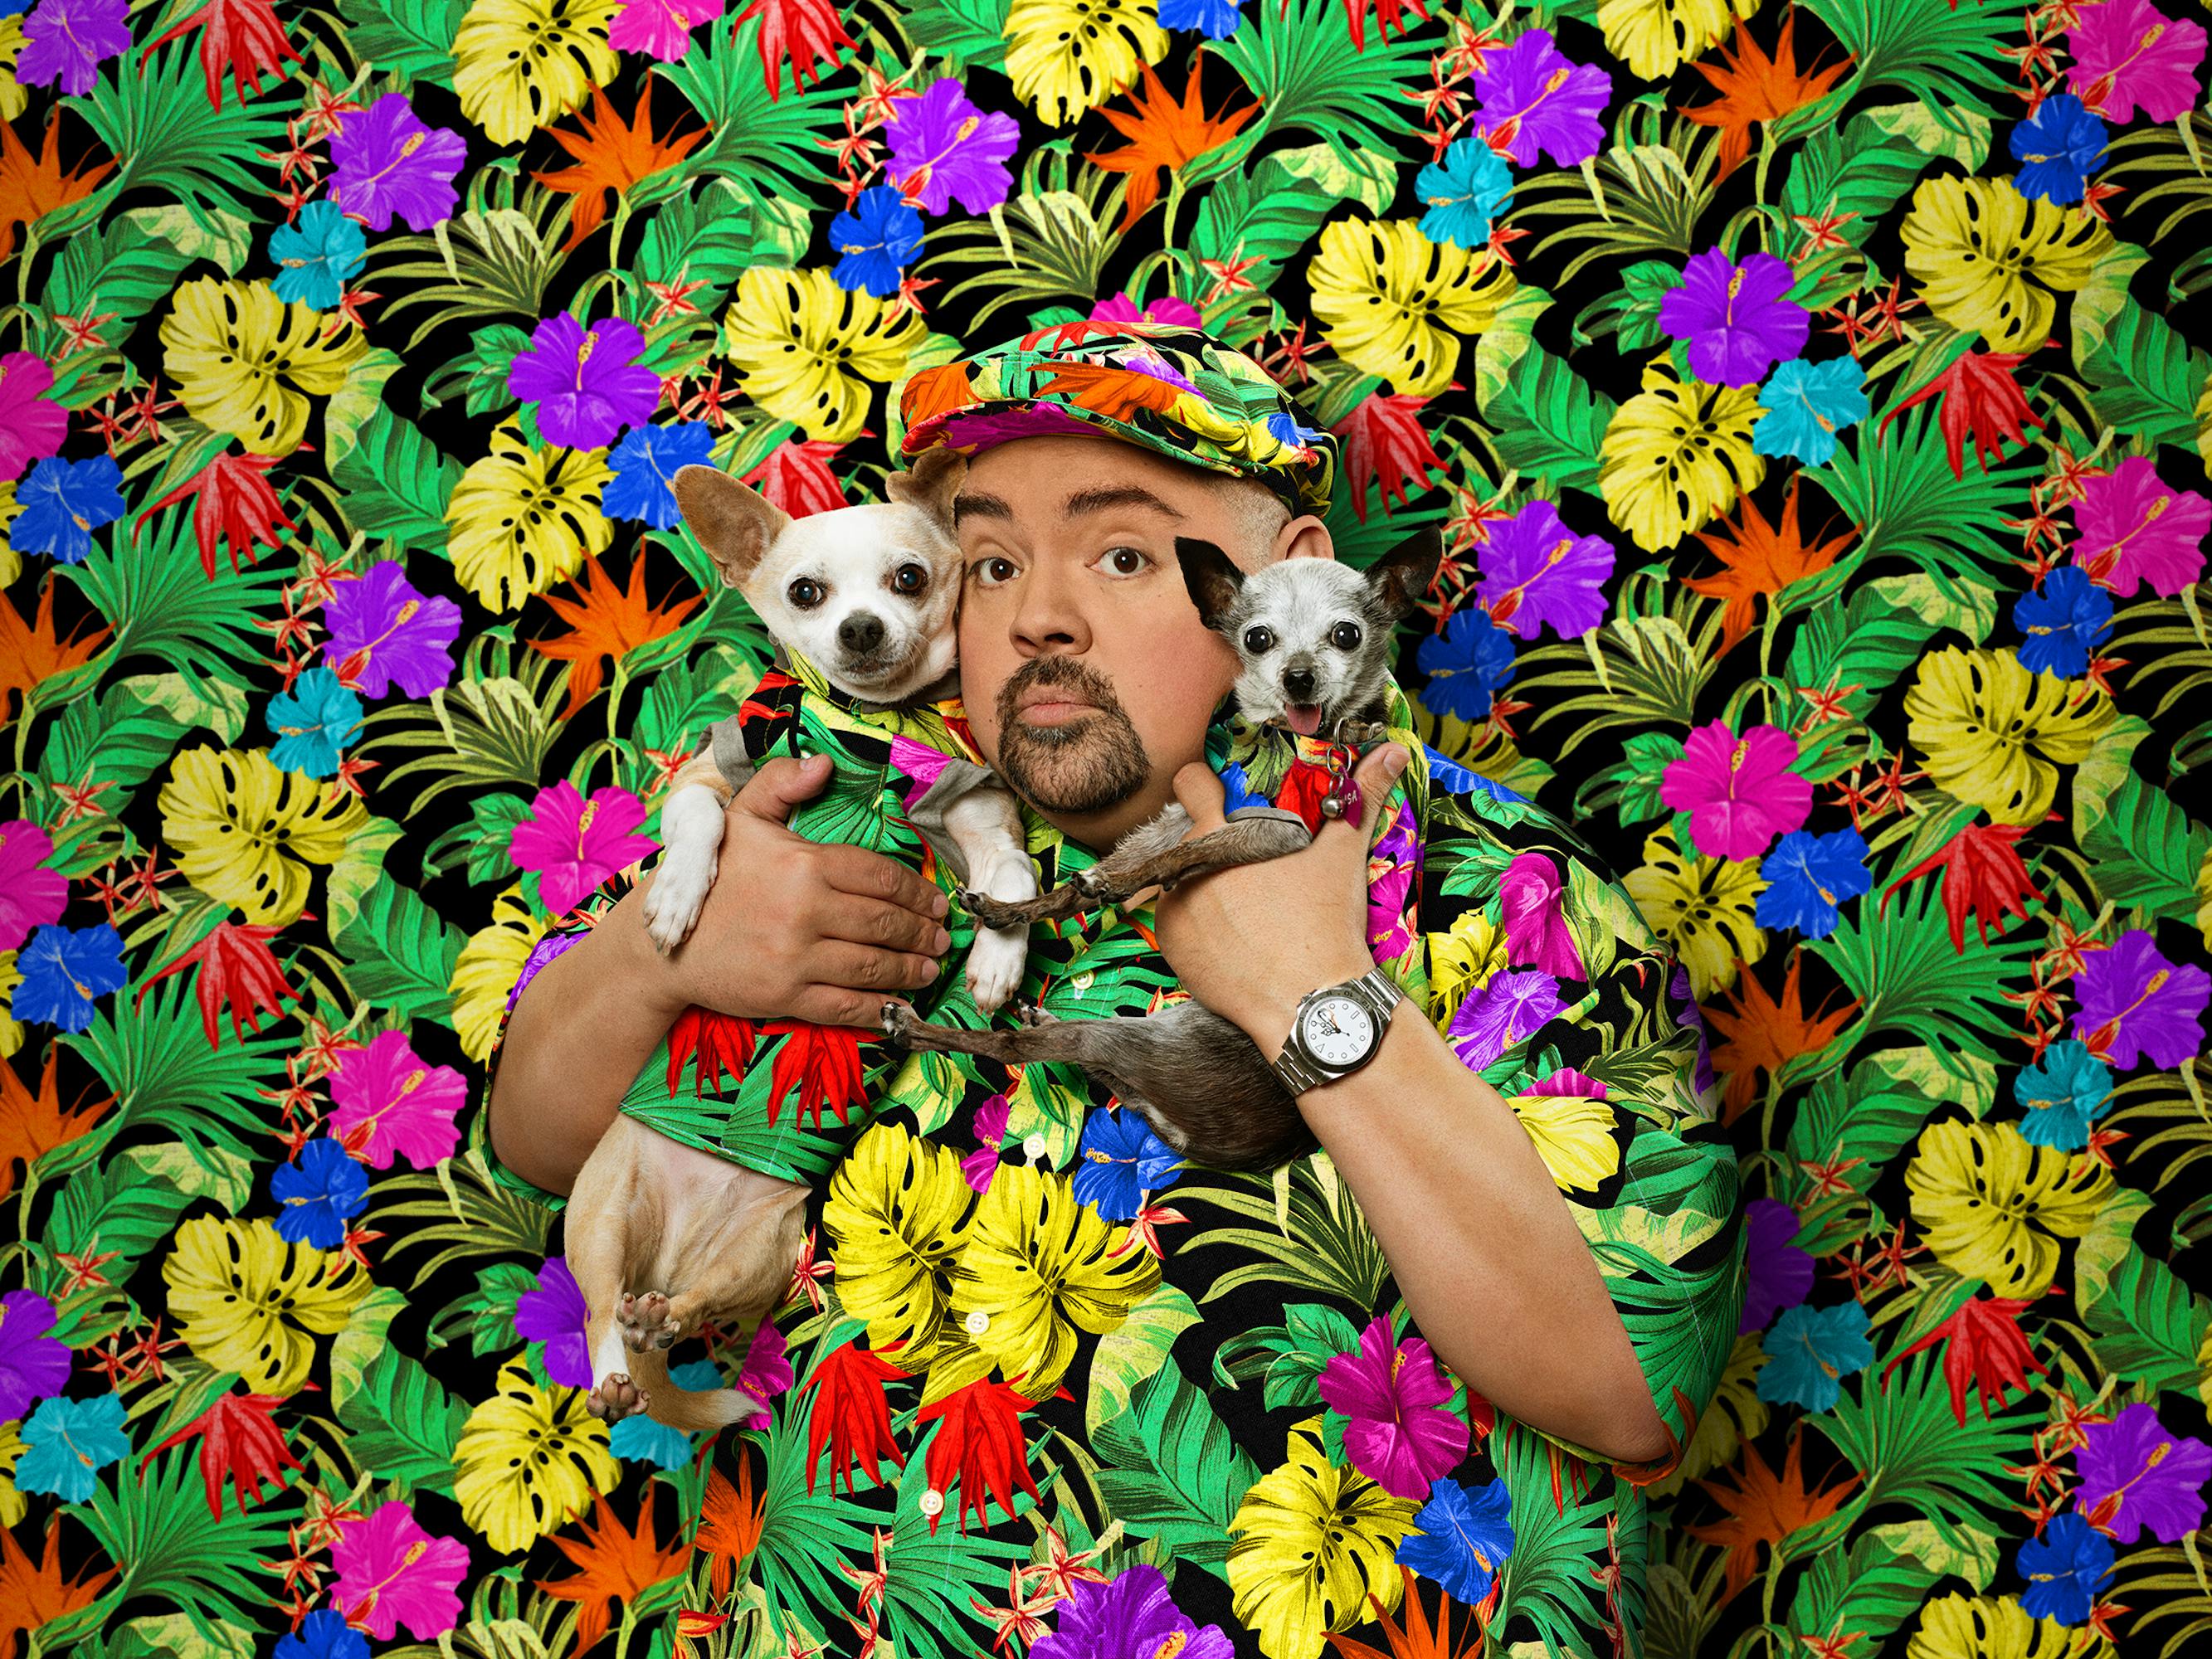 Gabriel Iglesias blends in with a wall of flowers, holding his dogs close to his face.